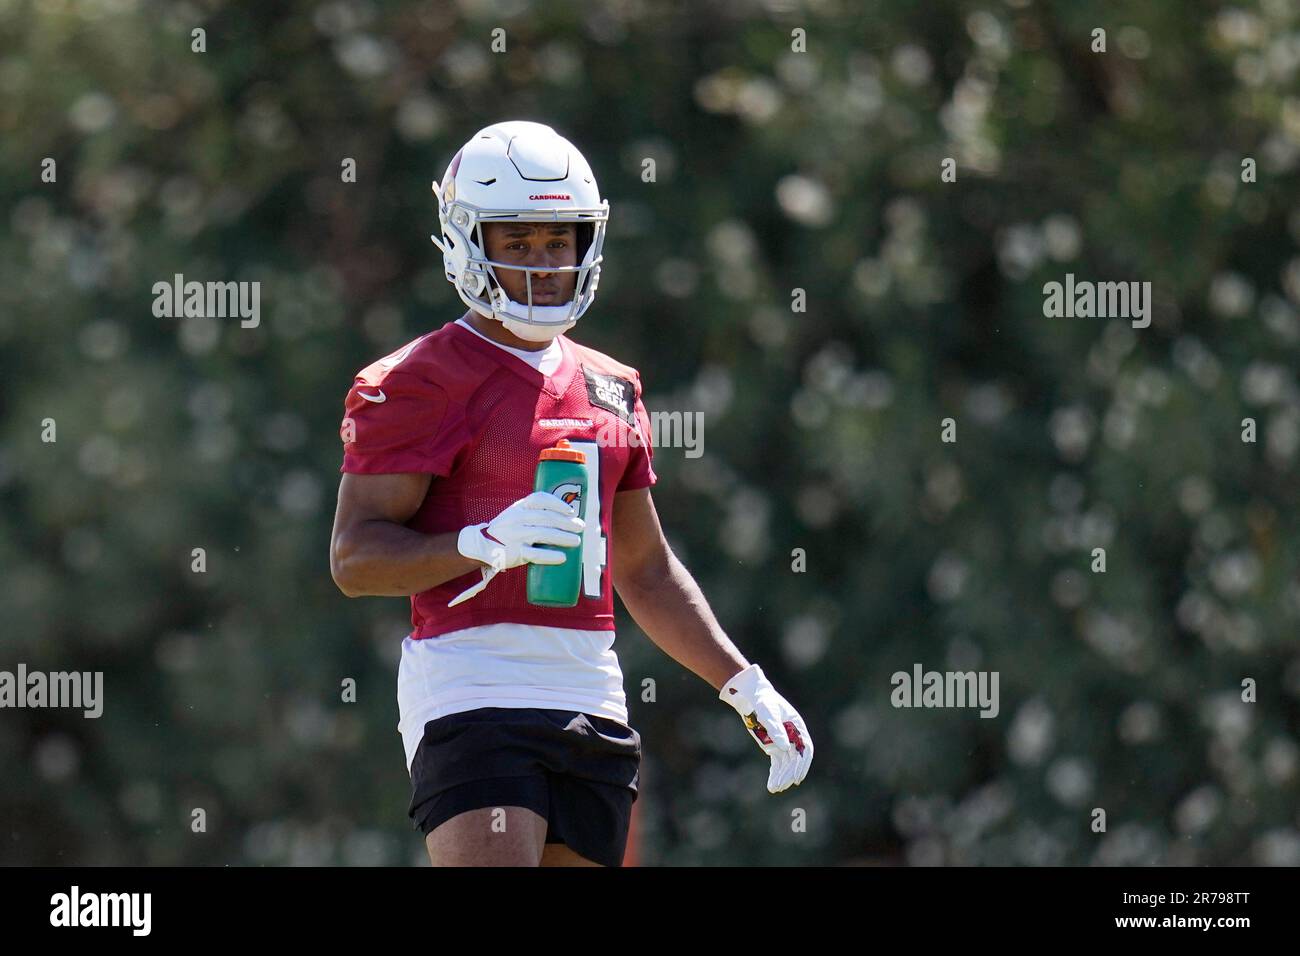 Arizona Cardinals wide receiver Rondale Moore pauses on the